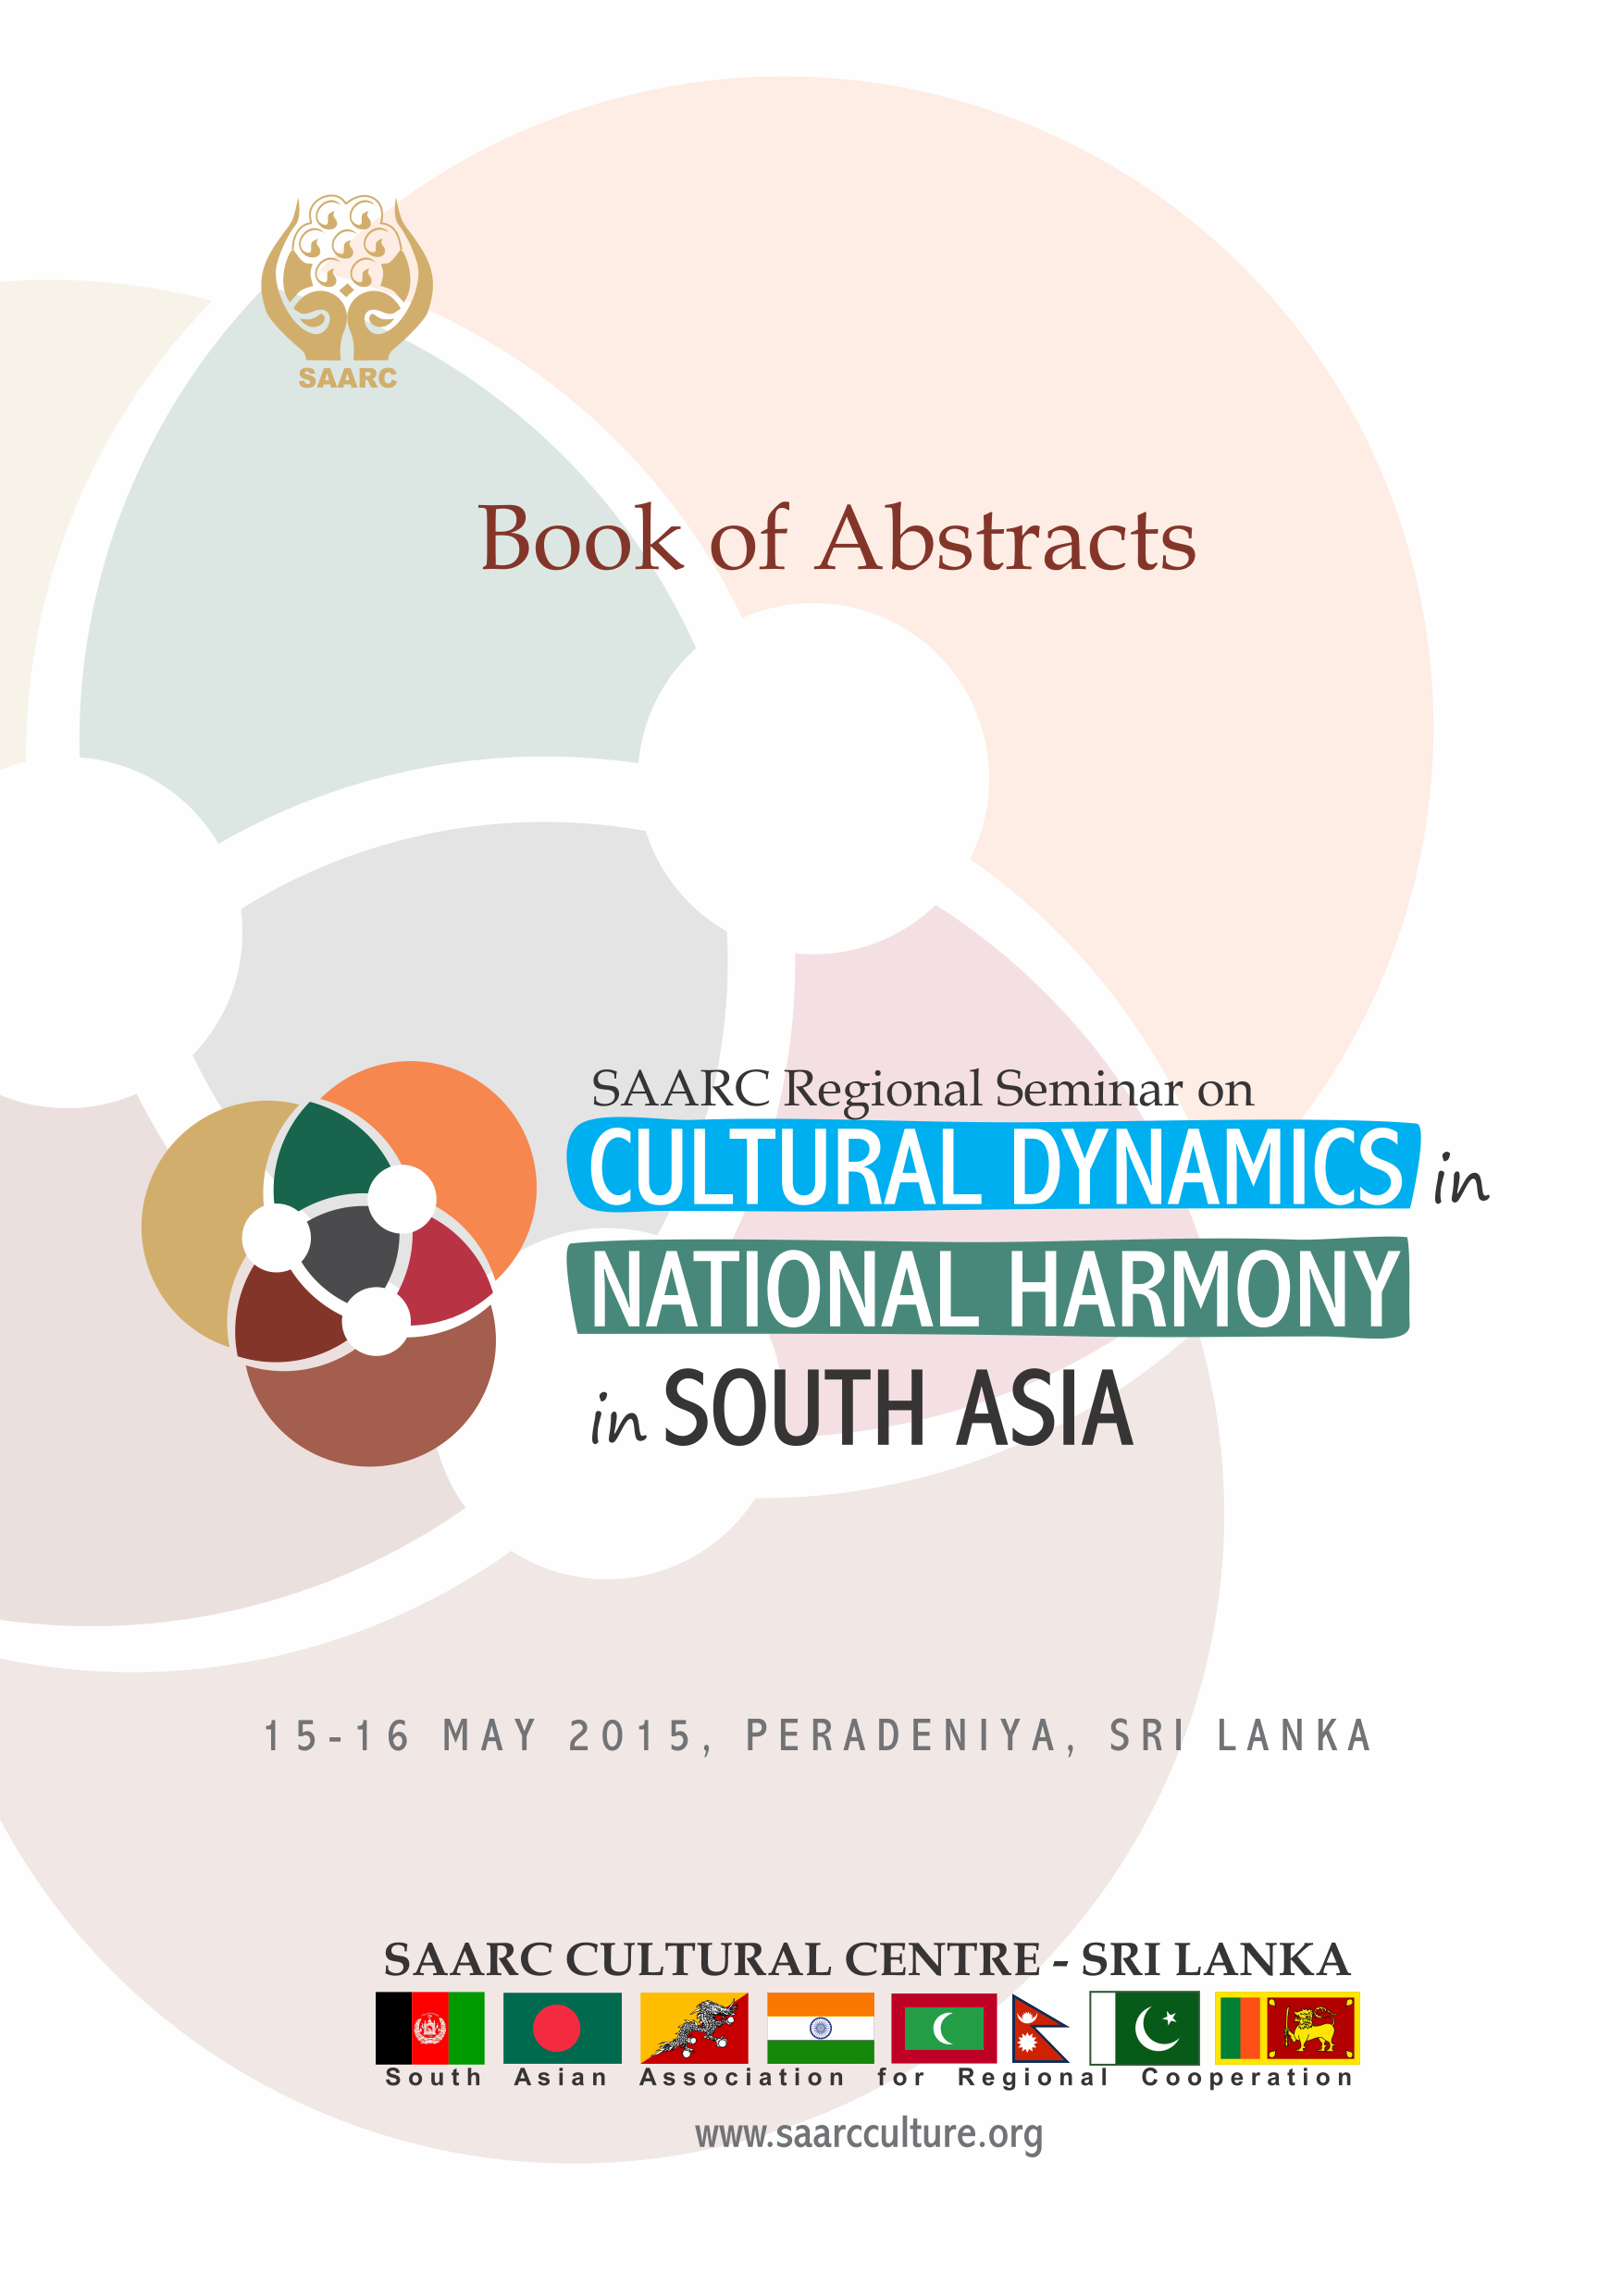 Cultural Dynamics in National Harmony in South Asia Image